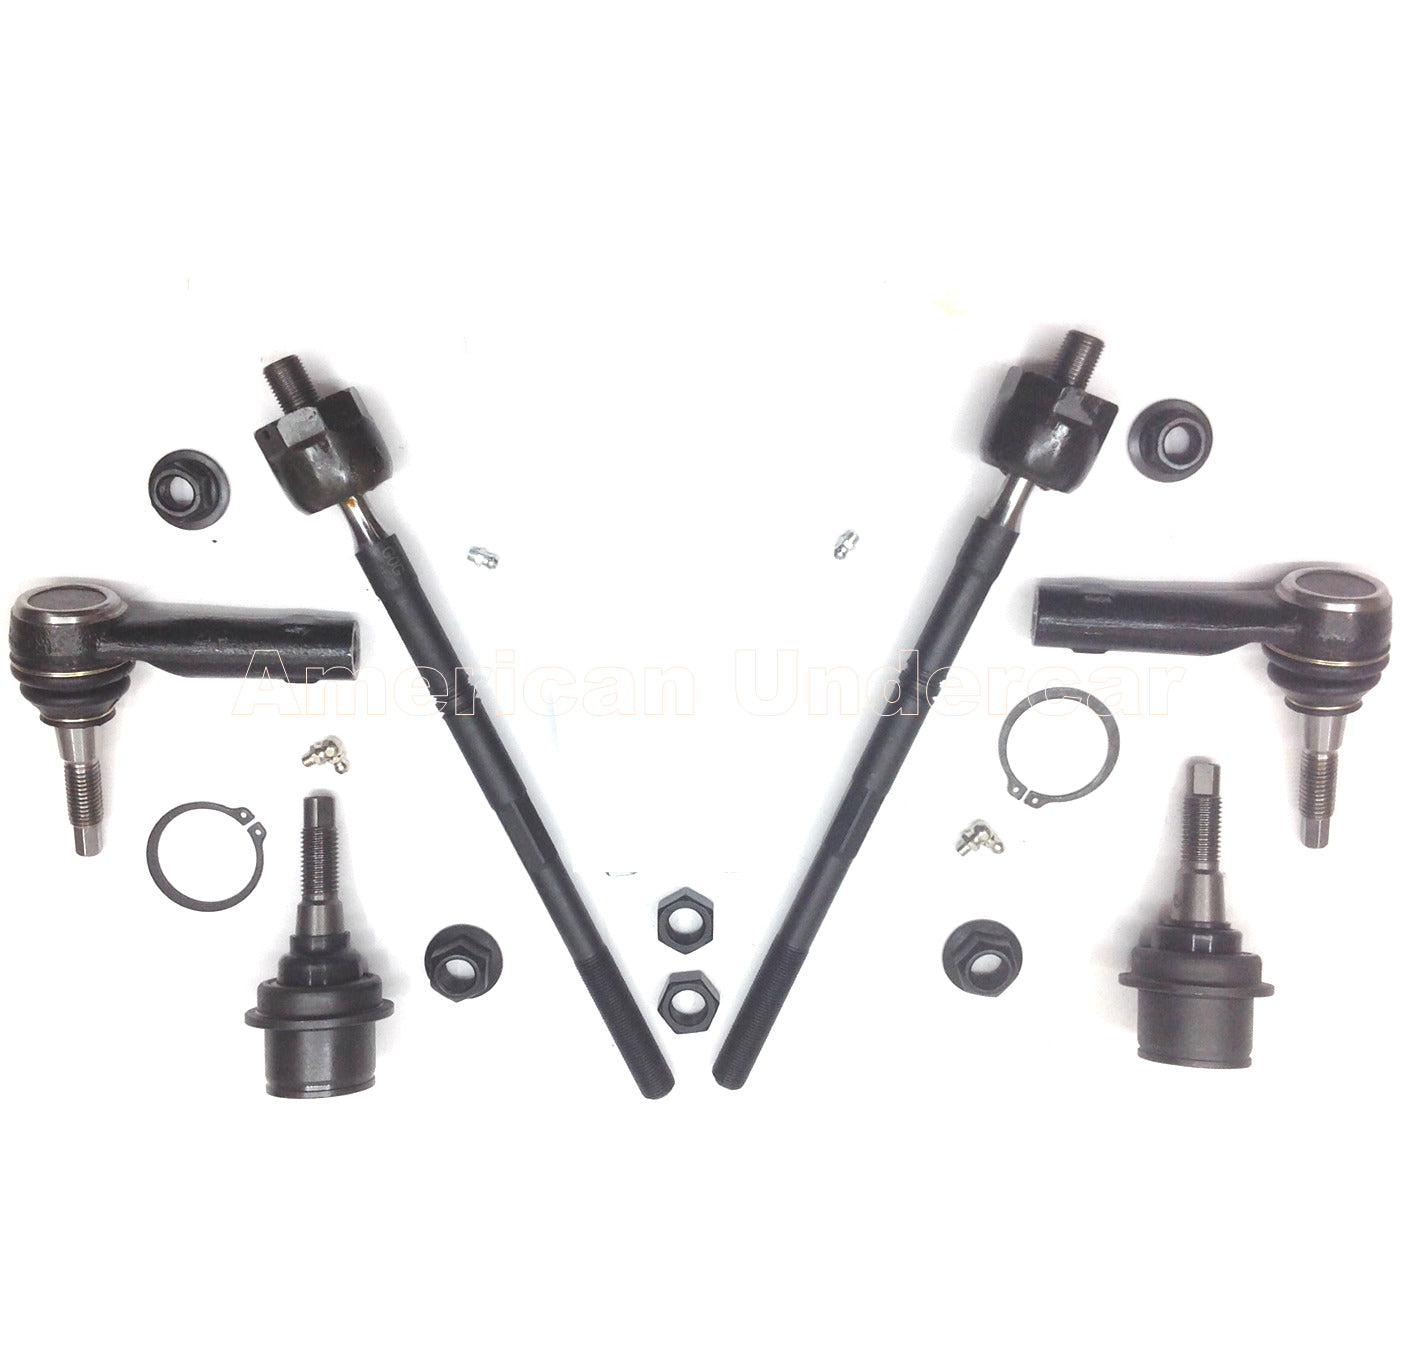 Lifetime Lower Ball Joints Tie Rod Steering Kit for 2004-2008 Ford F150 2WD